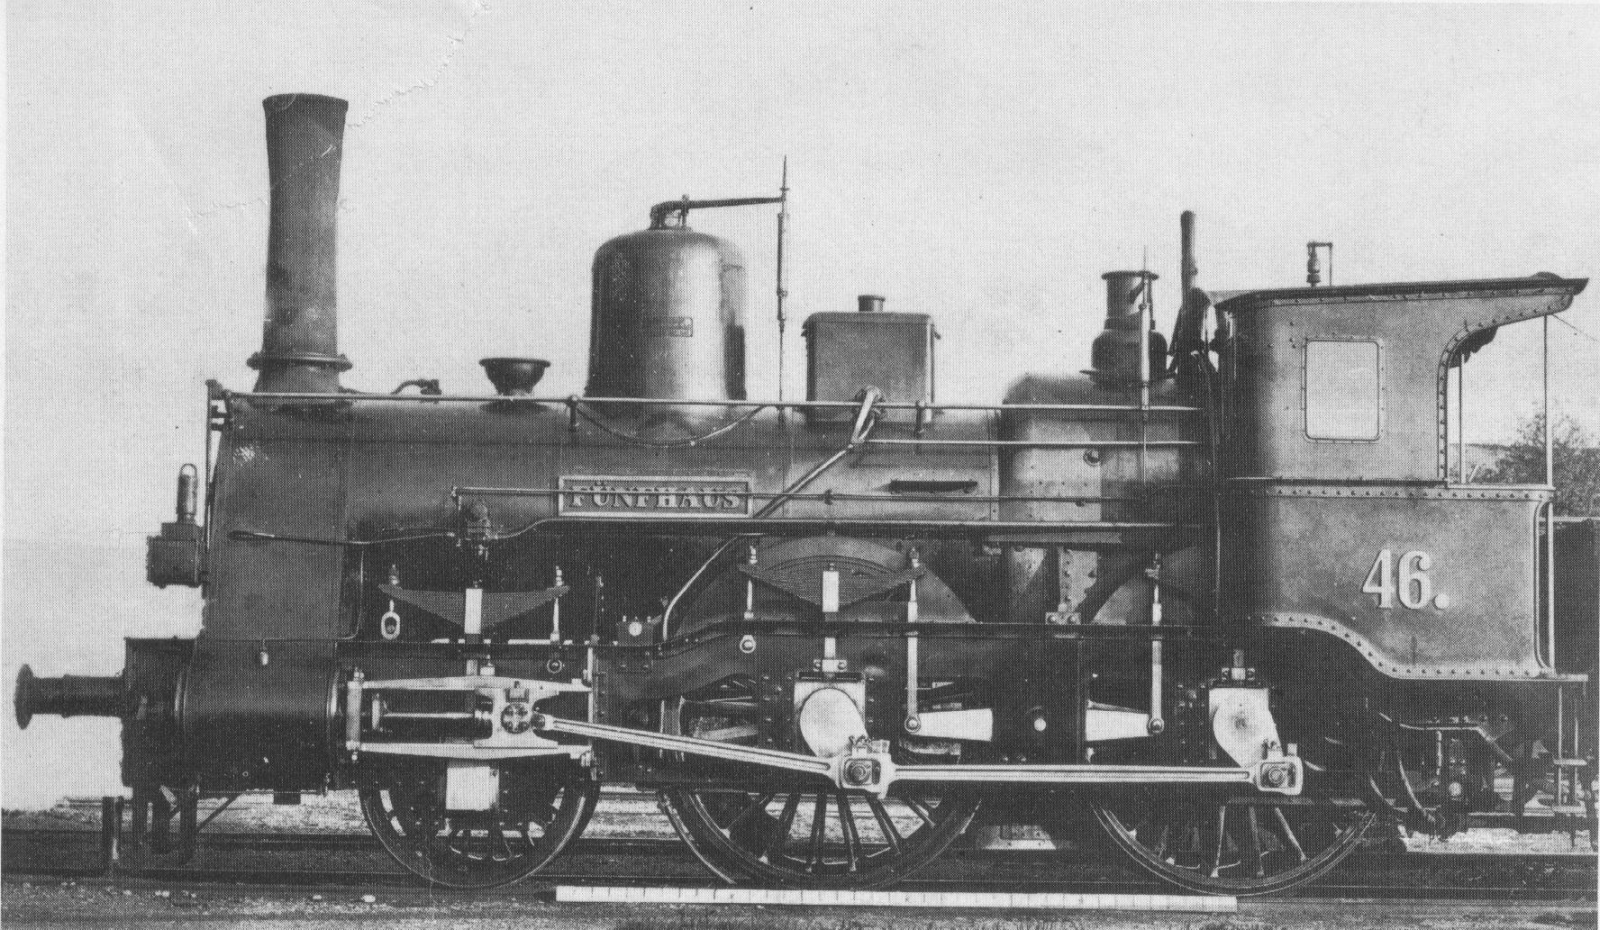 No. 46 “Fünfhaus” before being redesignated by the kkStB